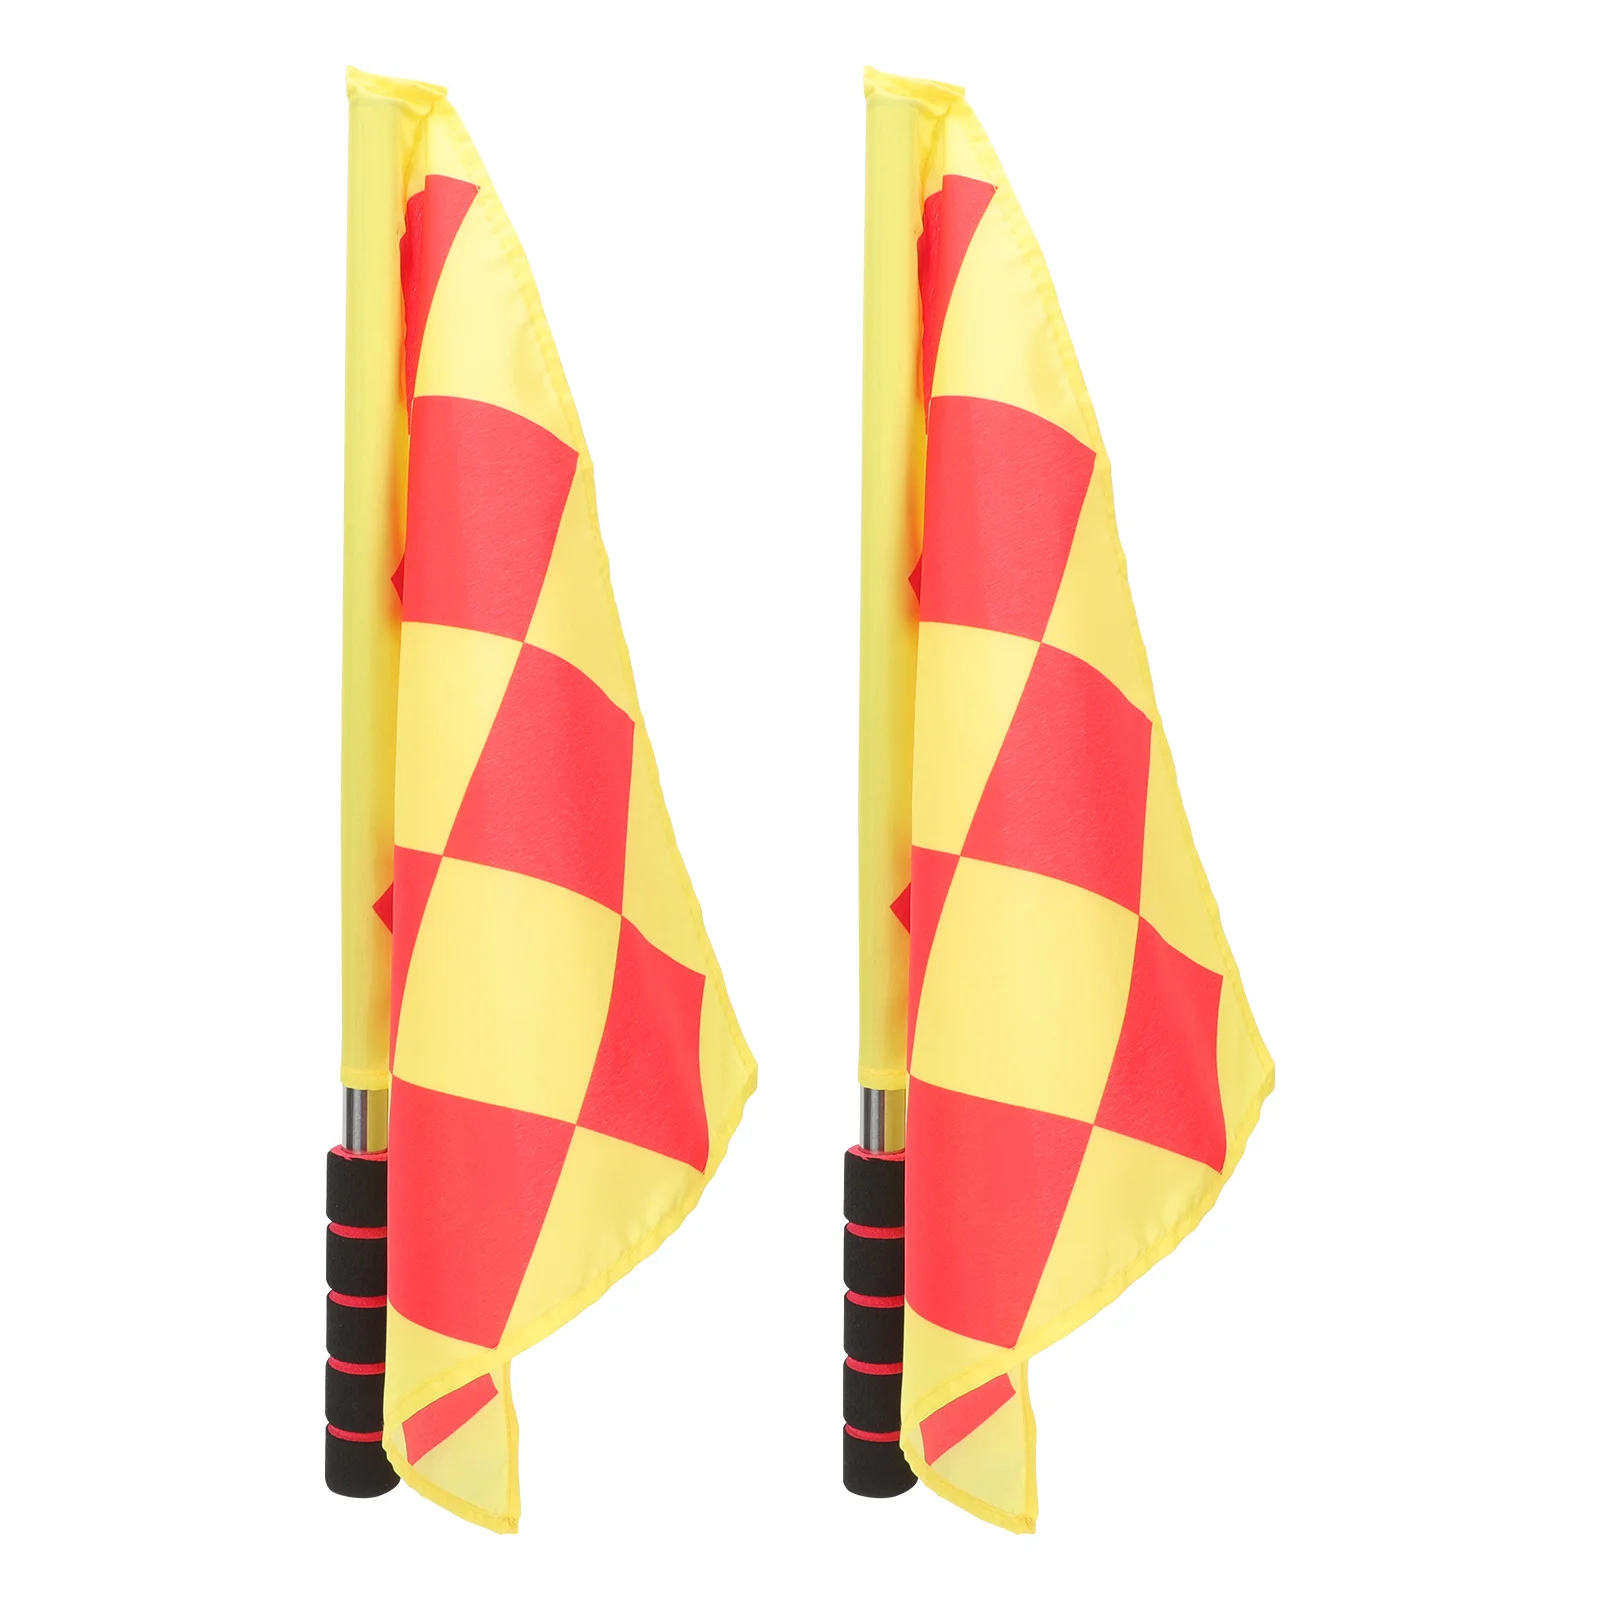 2 Pcs Football Referee Flag Athletic Gear Commanding Match Flags Waving For Racing Foam Conducting